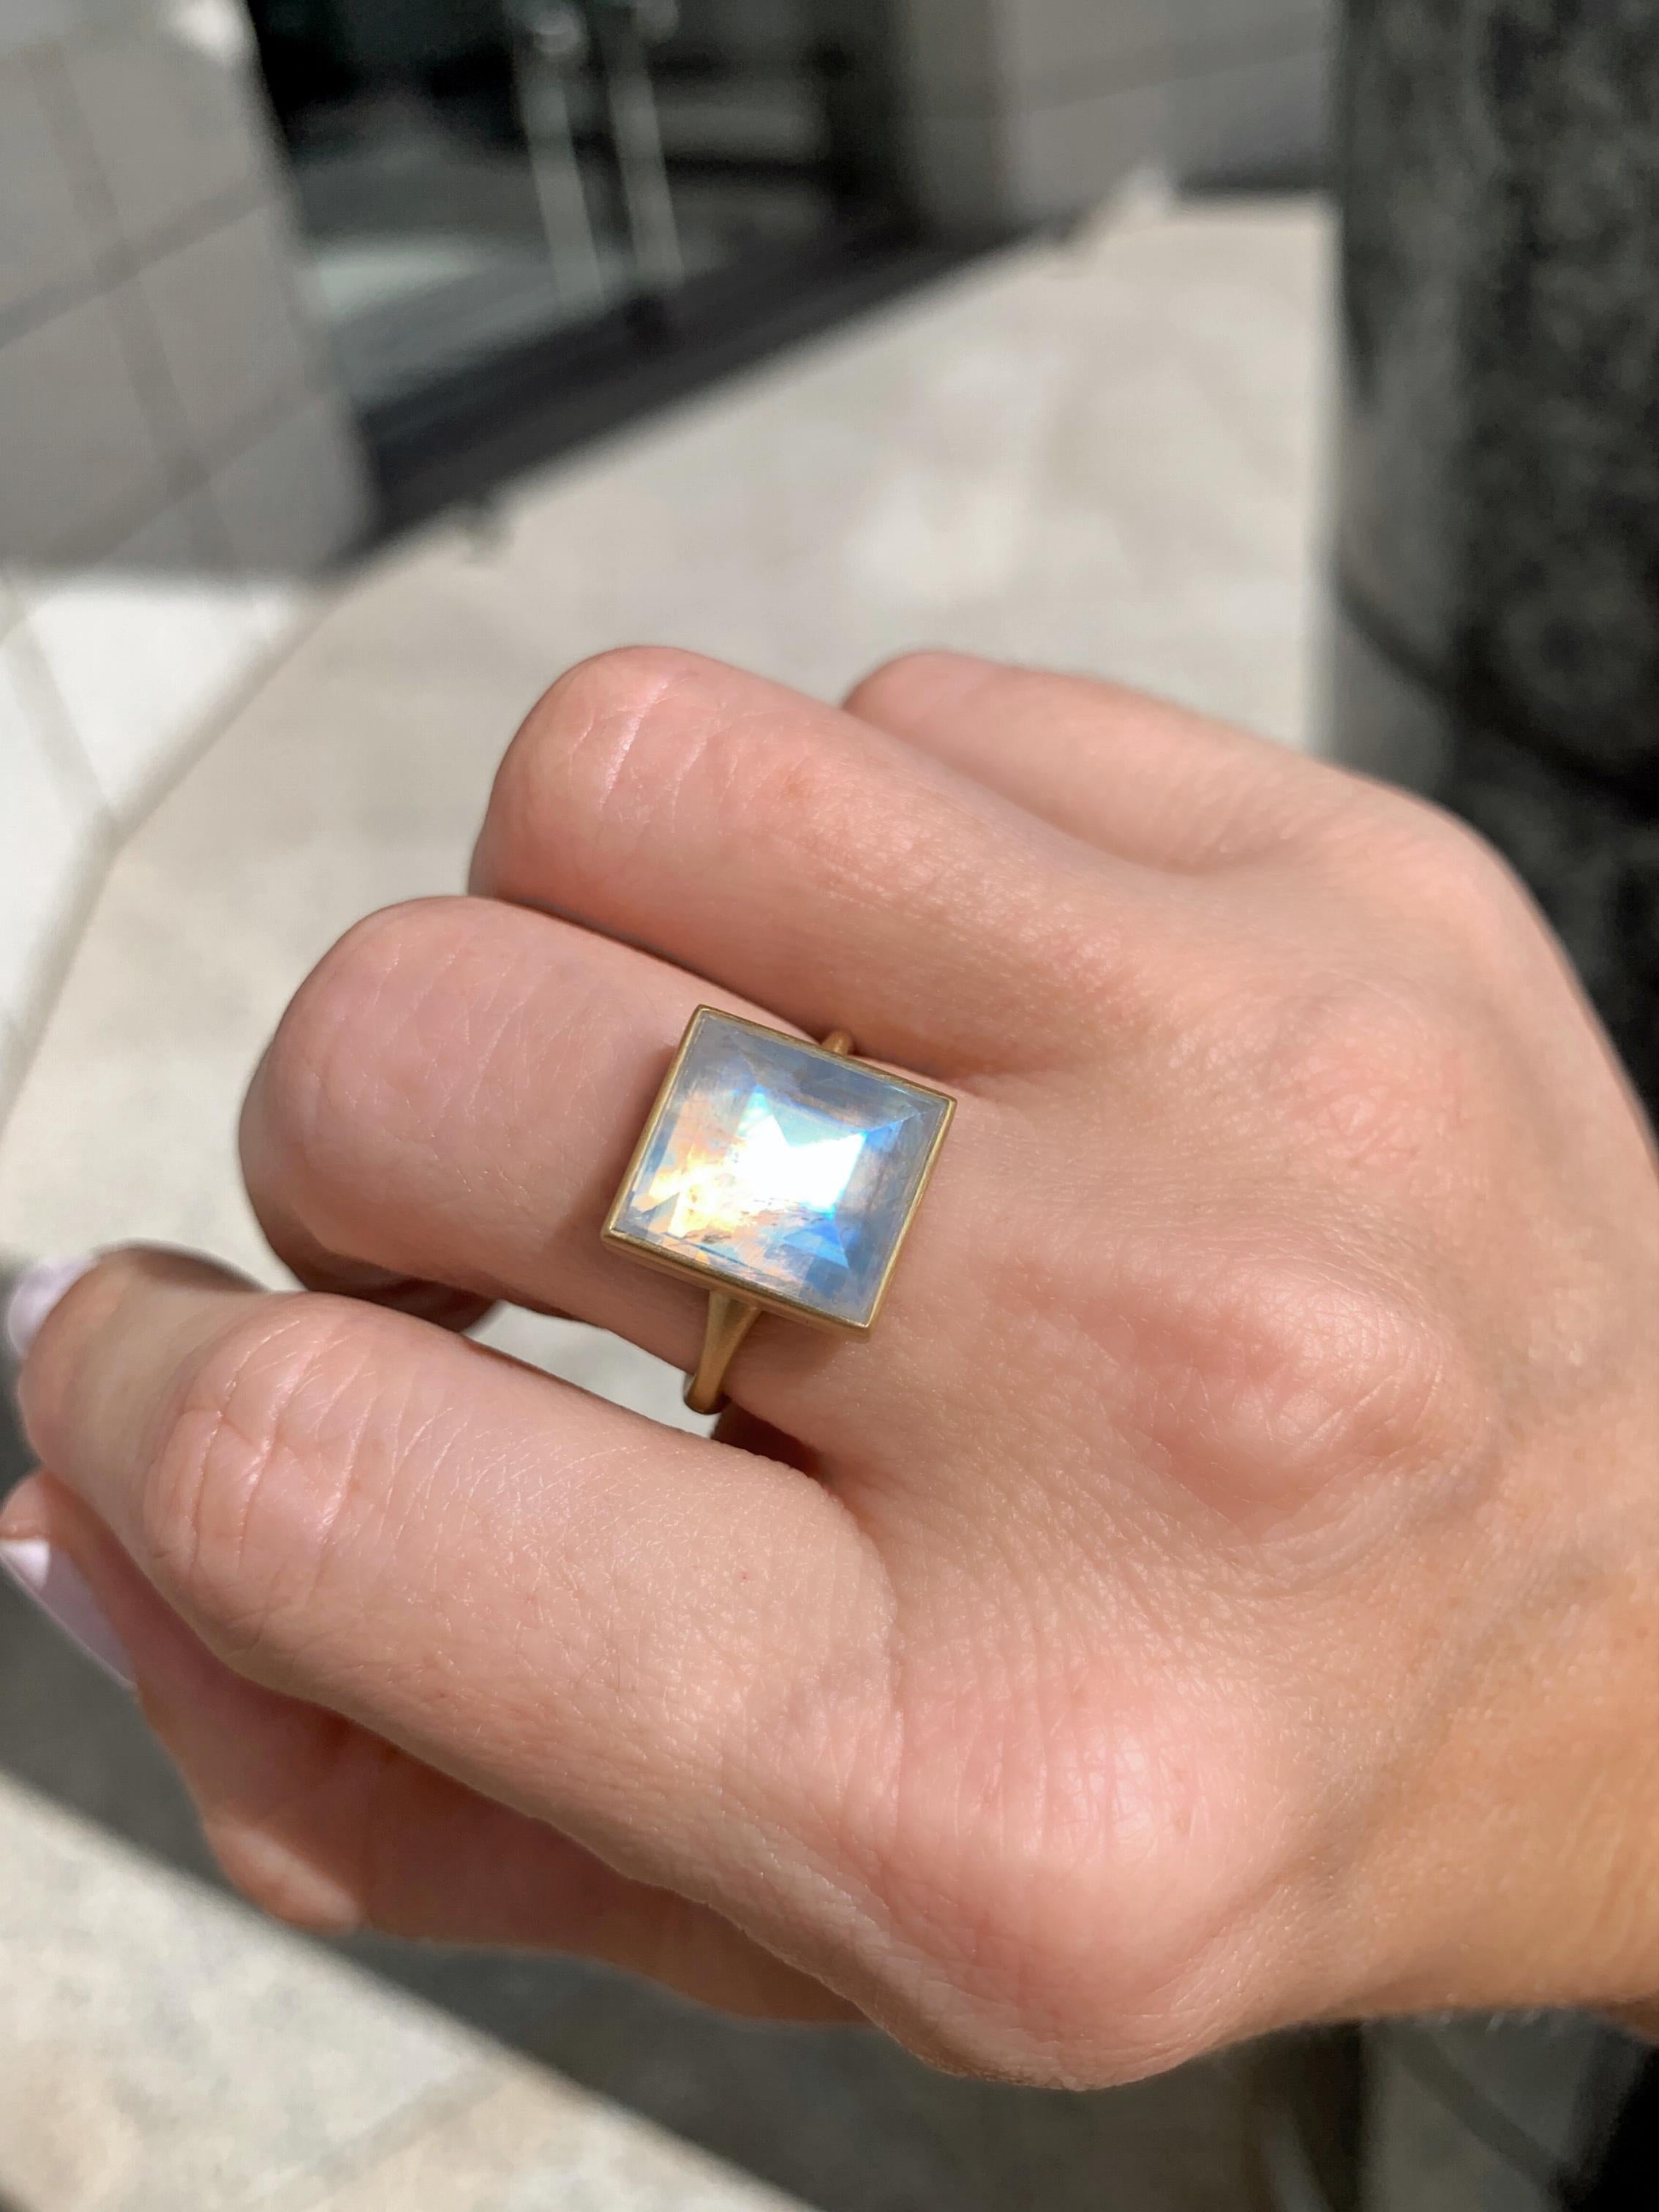 One of a Kind Ring handmade by renowned jewelry maker Lola Brooks showcasing a fiery glowing 8.41 carat faceted rainbow moonstone in Lola's signature-finished 18k yellow gold on a tapered band. Stamped and Hallmarked. 

Size 7.25 (can be sized upon